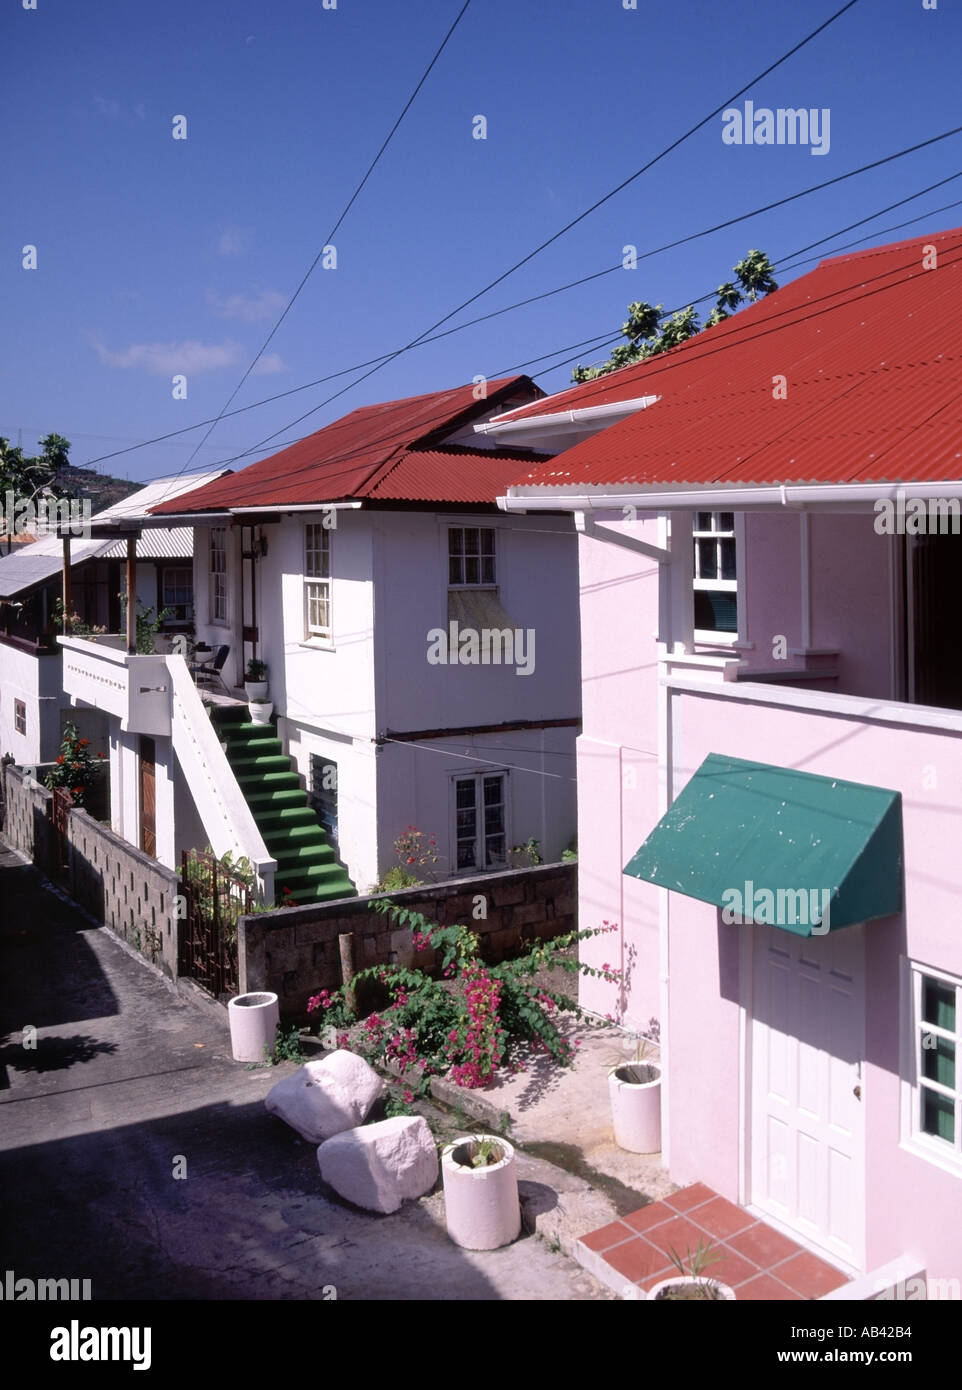 St Georges Grenada housing with typical corrugated steel sheeting used on roofs and painted bright red Stock Photo